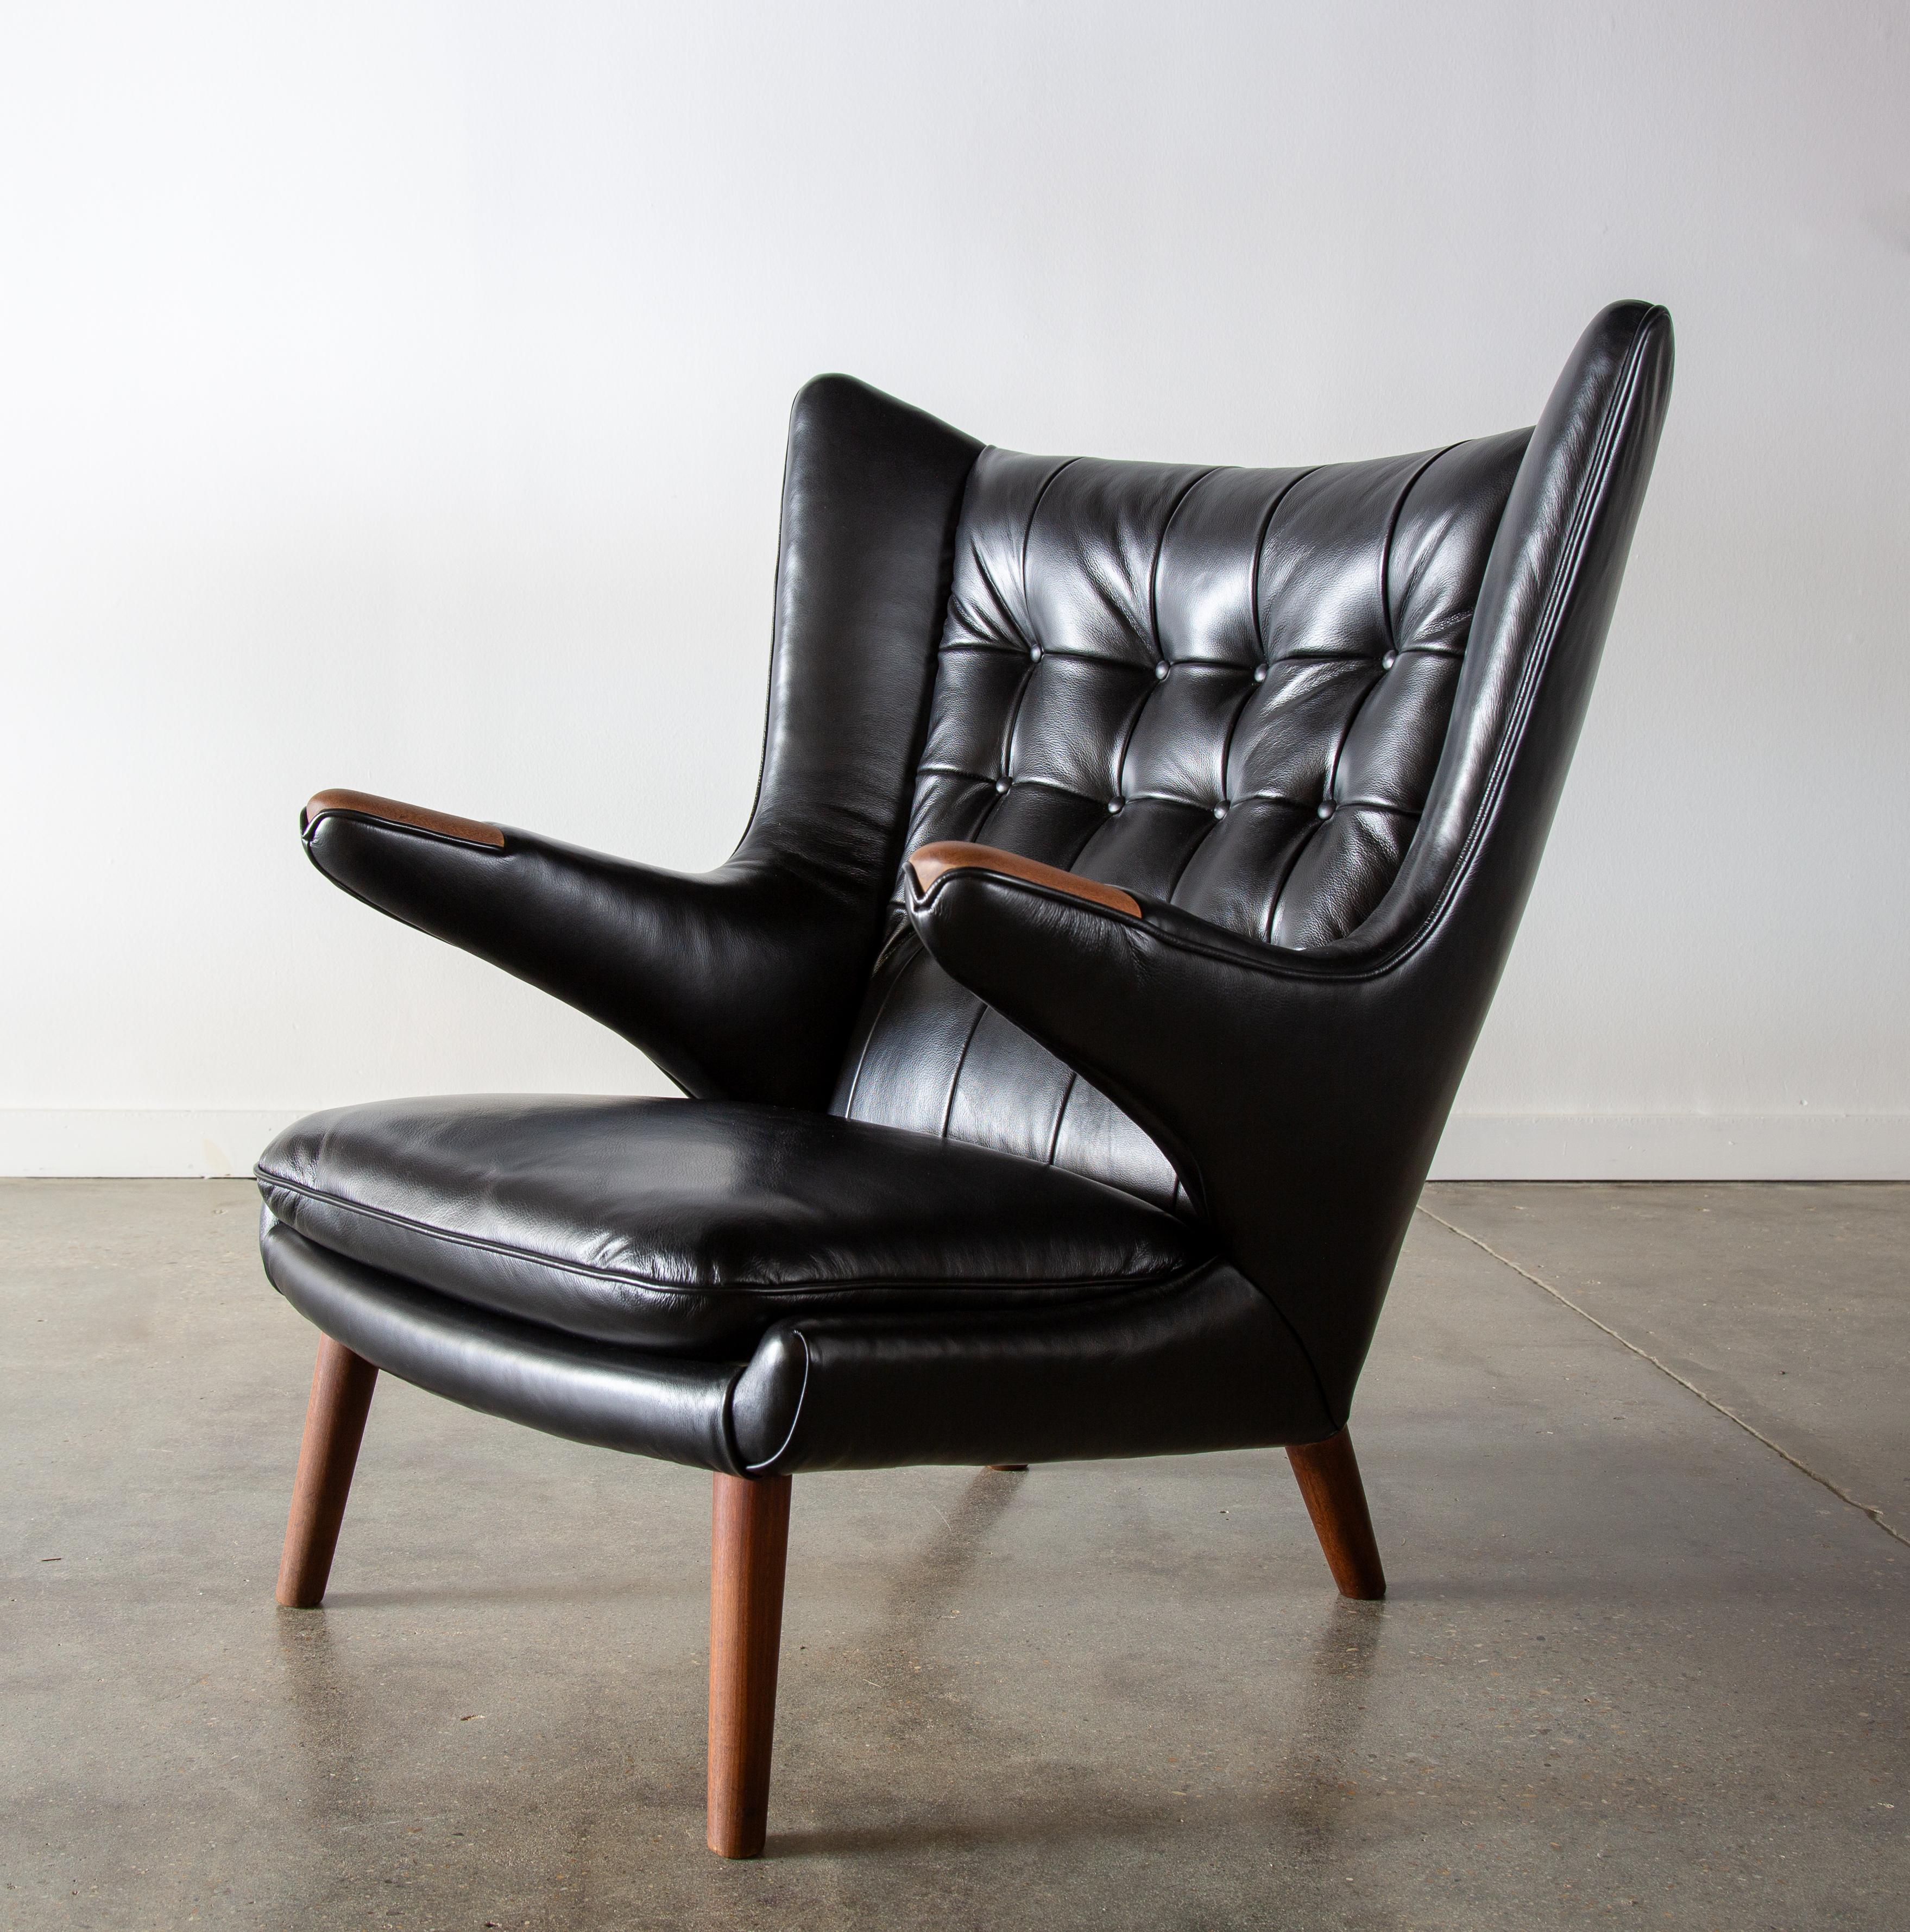 An original AP19 “Papa bear” chair designed by Hans J. Wegner for A.P. Stolen, designed in 1951 and made in Denmark.  This example with new black leather and featuring teak legs and teak paws. Retaining its original ap stolen stamp with the designer